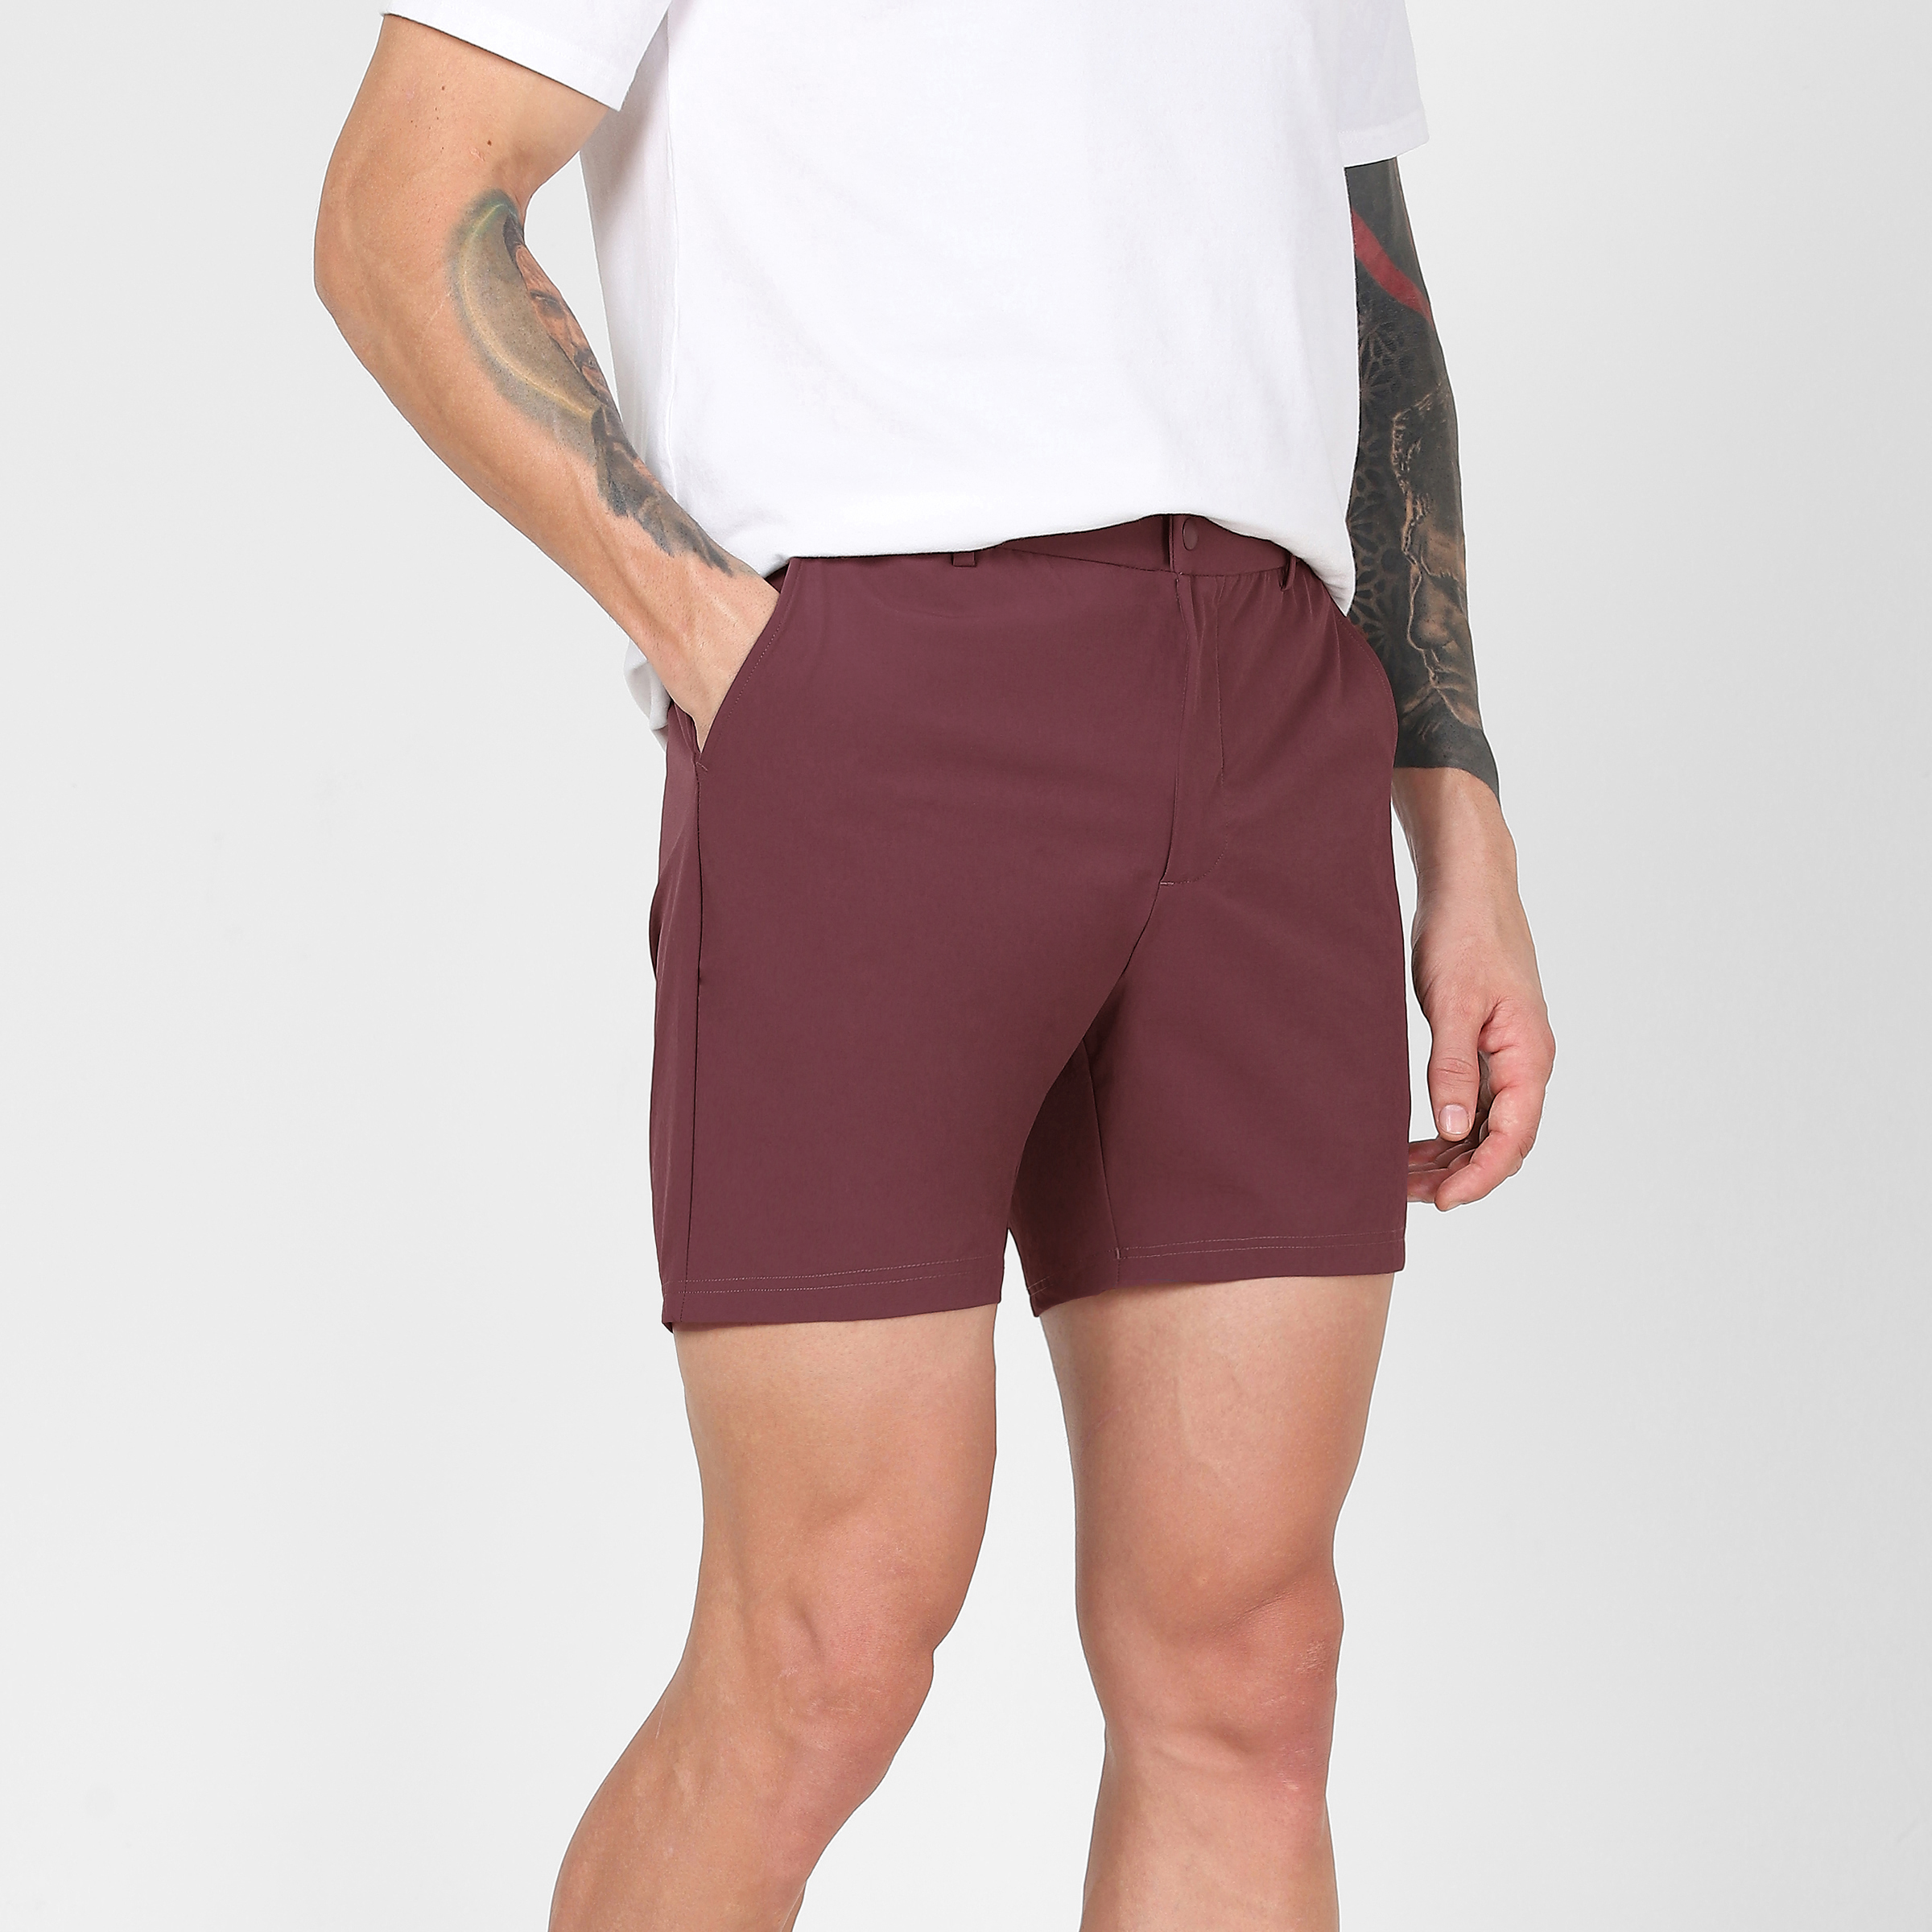 Tour Short 5.5" Wine right side on model hand in pocket